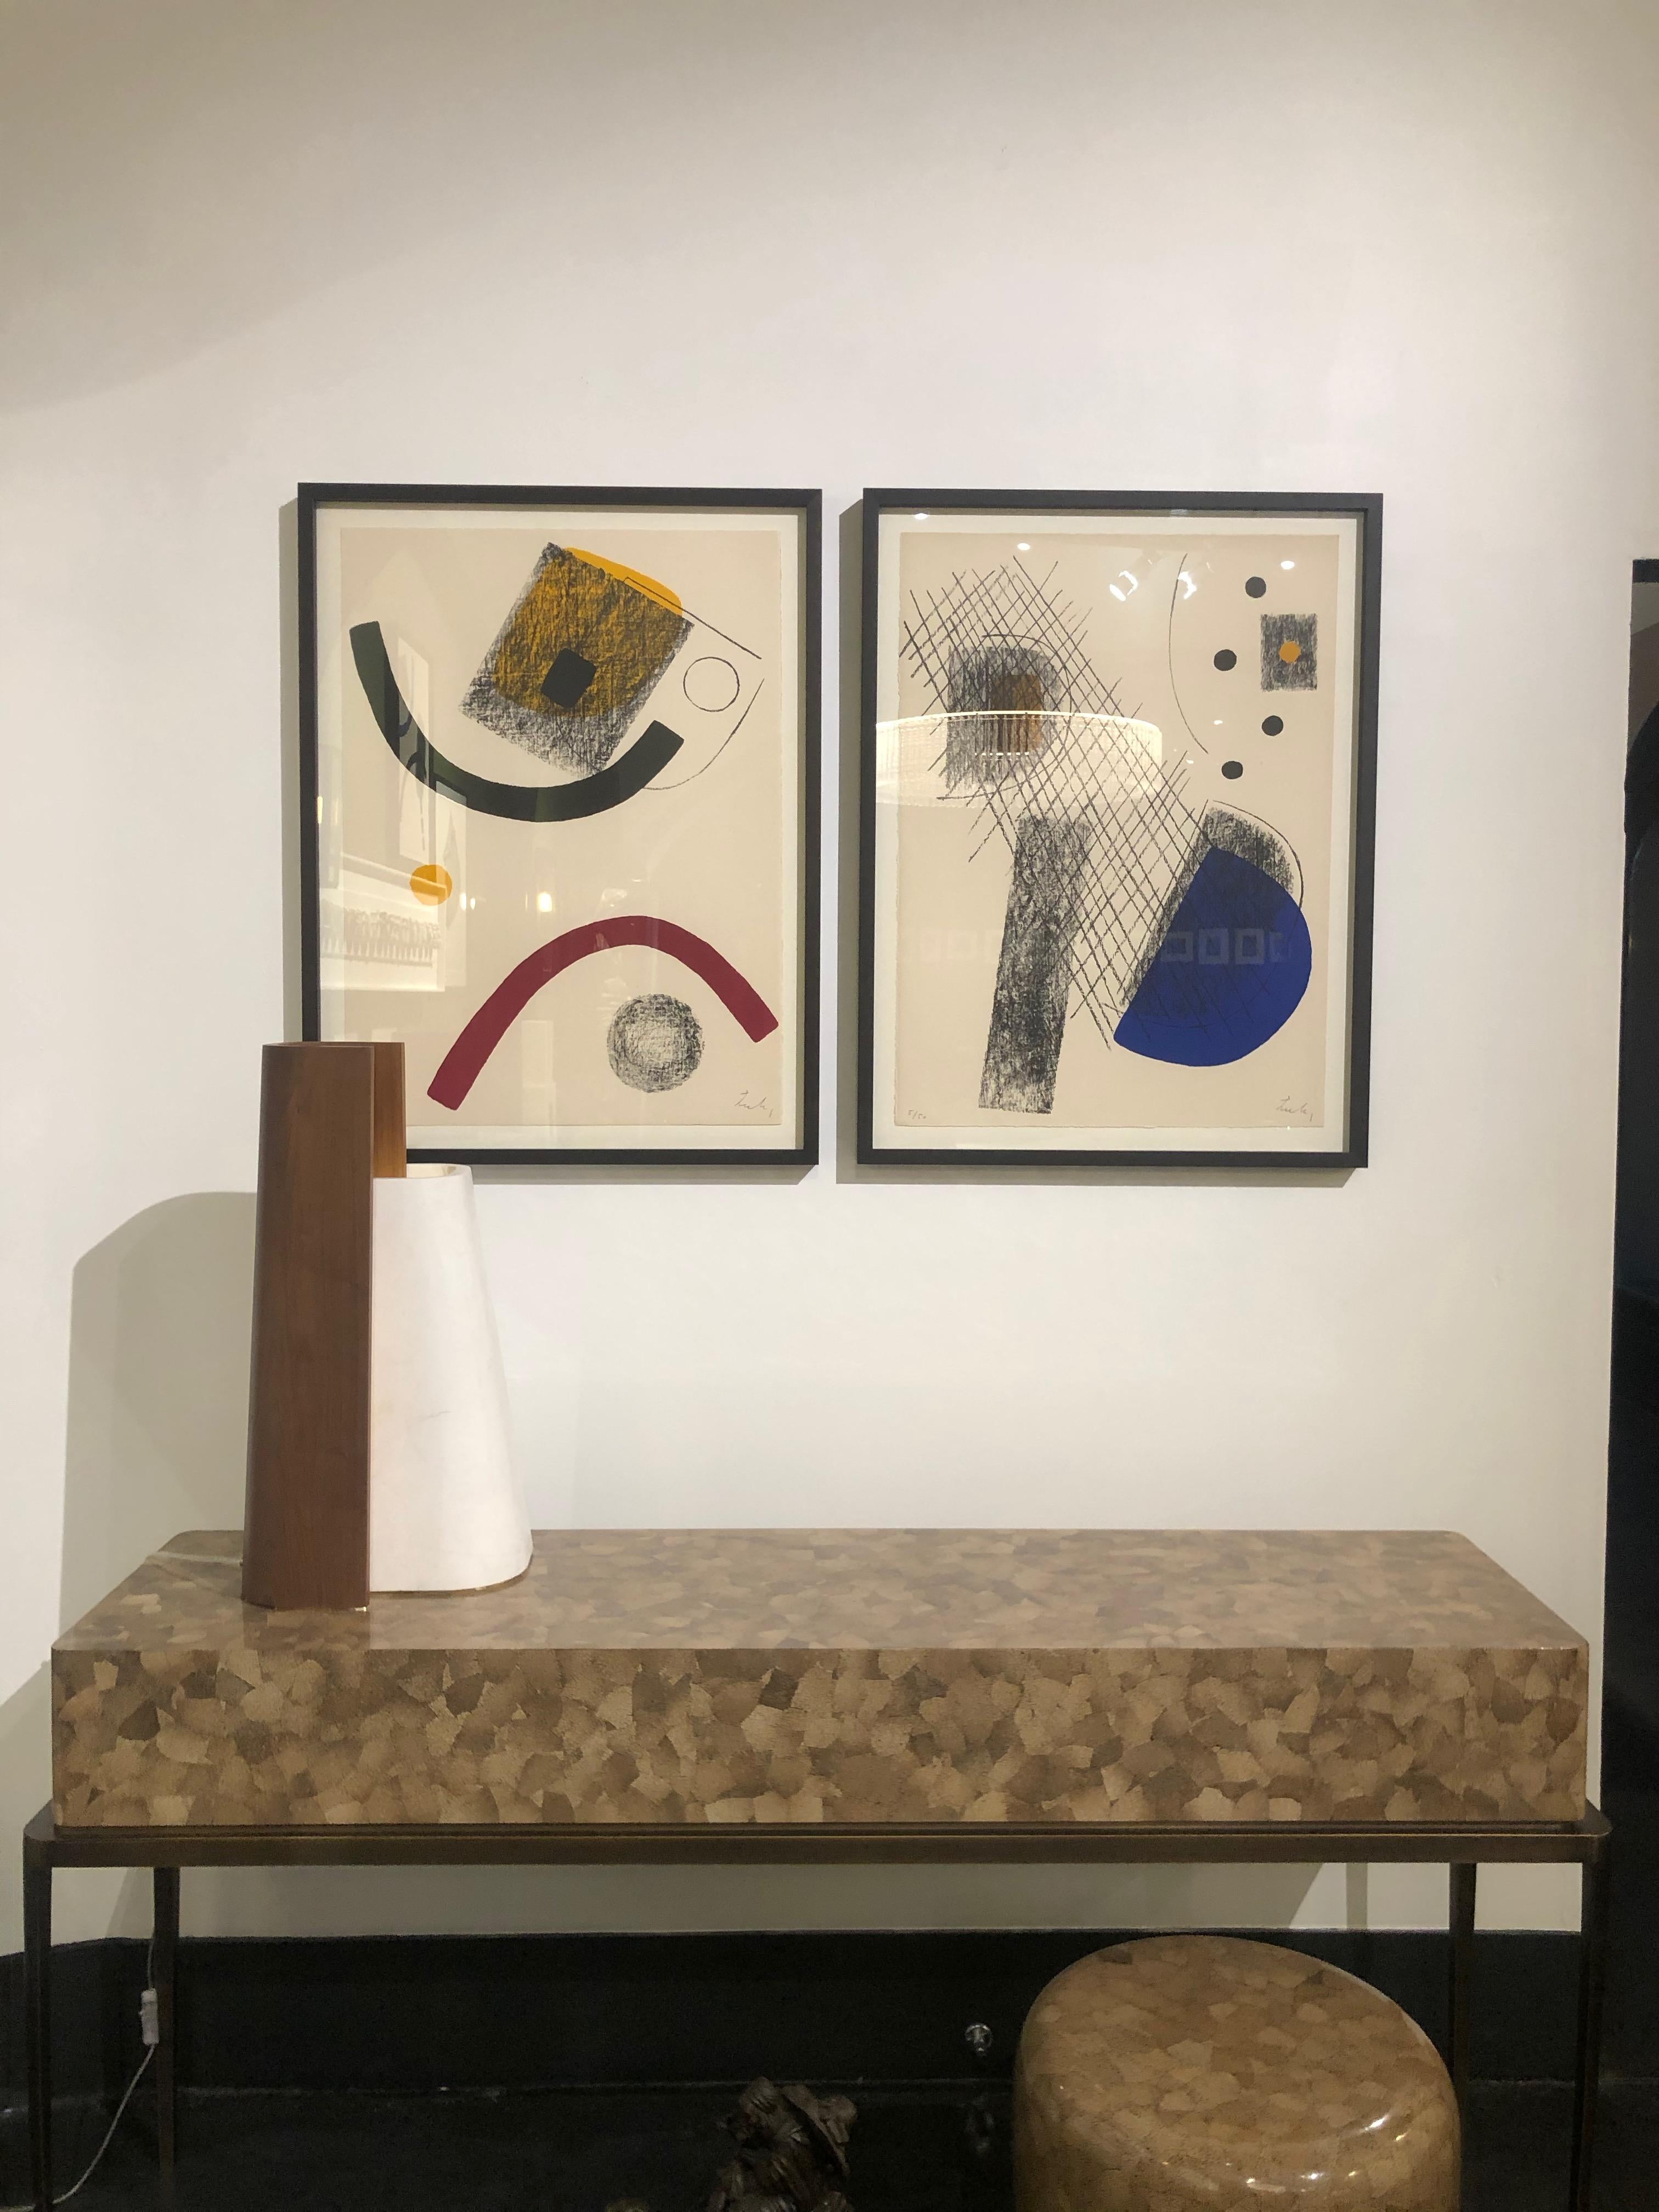 Eggshell Console, JAYA by Reda Amalou, 2018, Limited Edition of 8, 165 cm For Sale 3